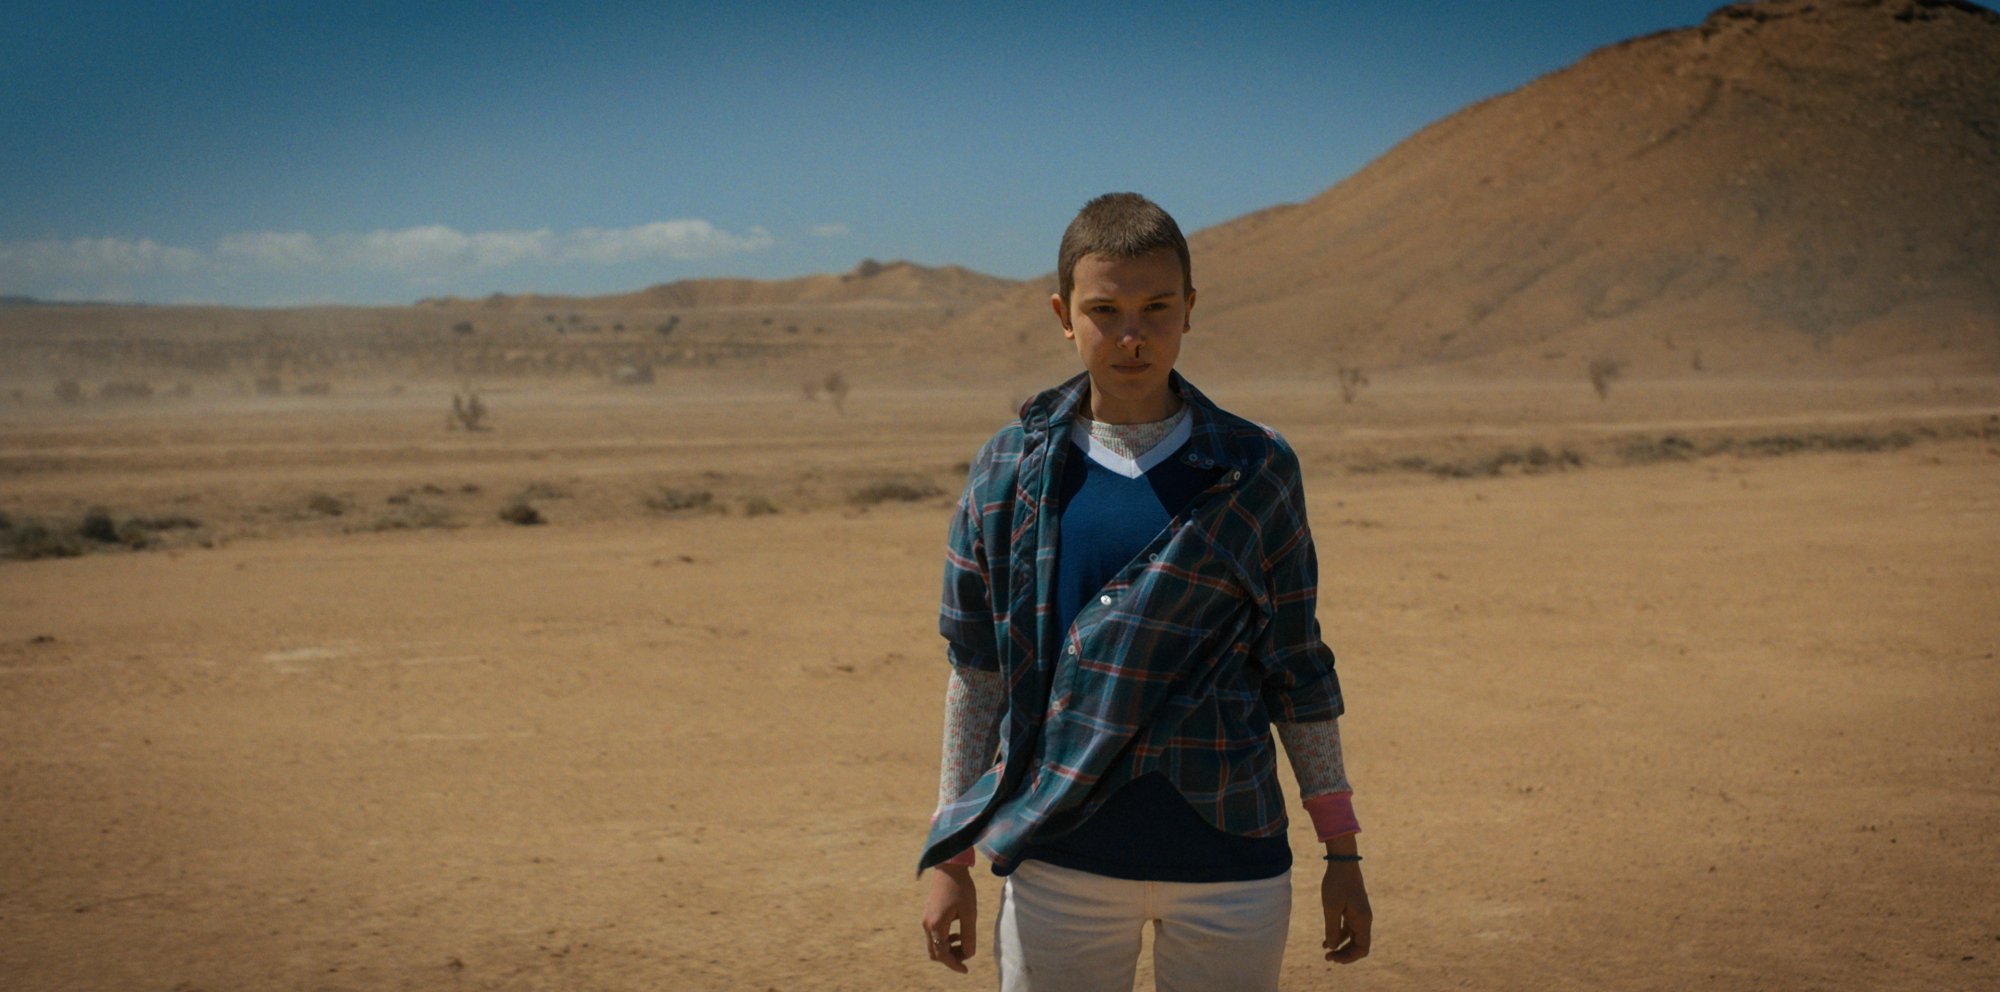 A young woman with a shaved hear stands alone in a desert.